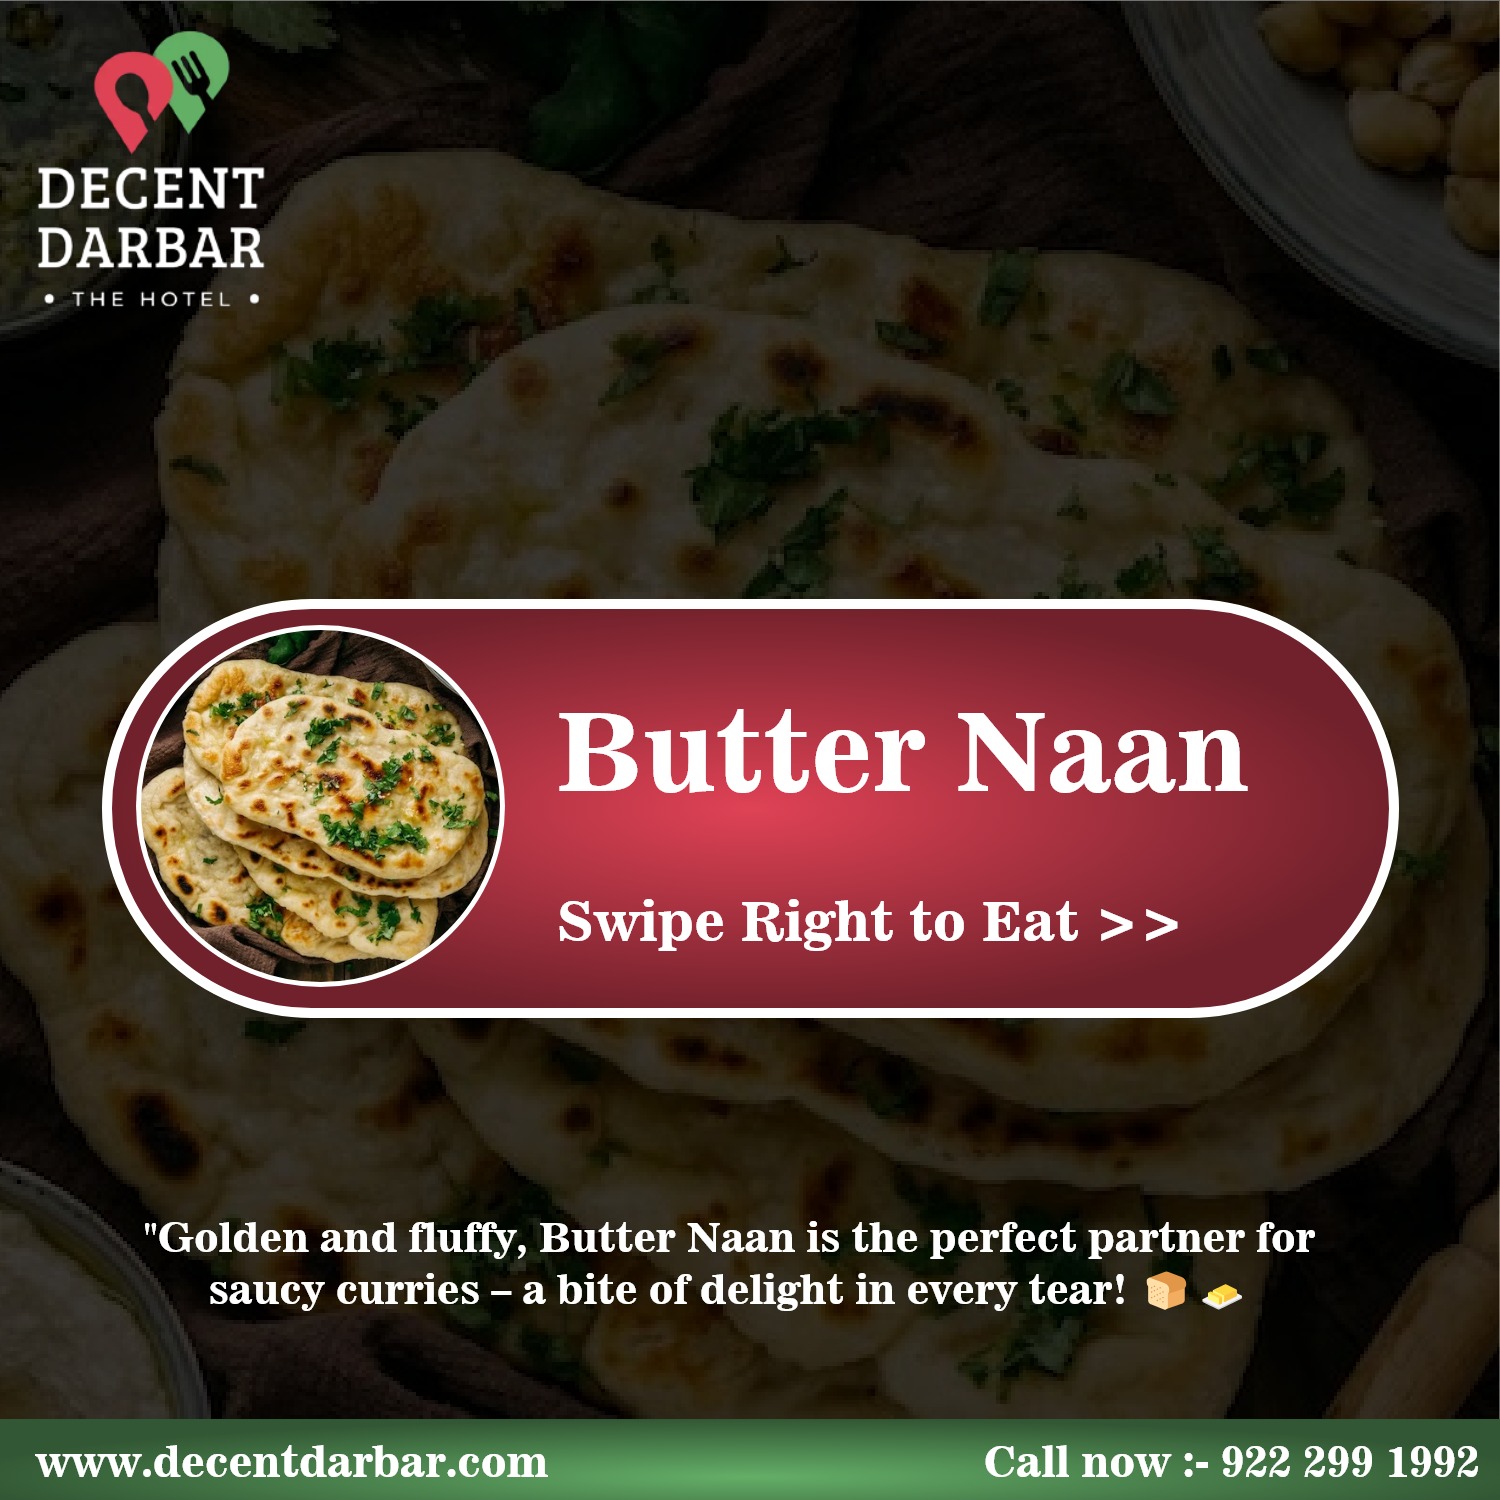 "Golden and fluffy, Butter Naan is the perfect par